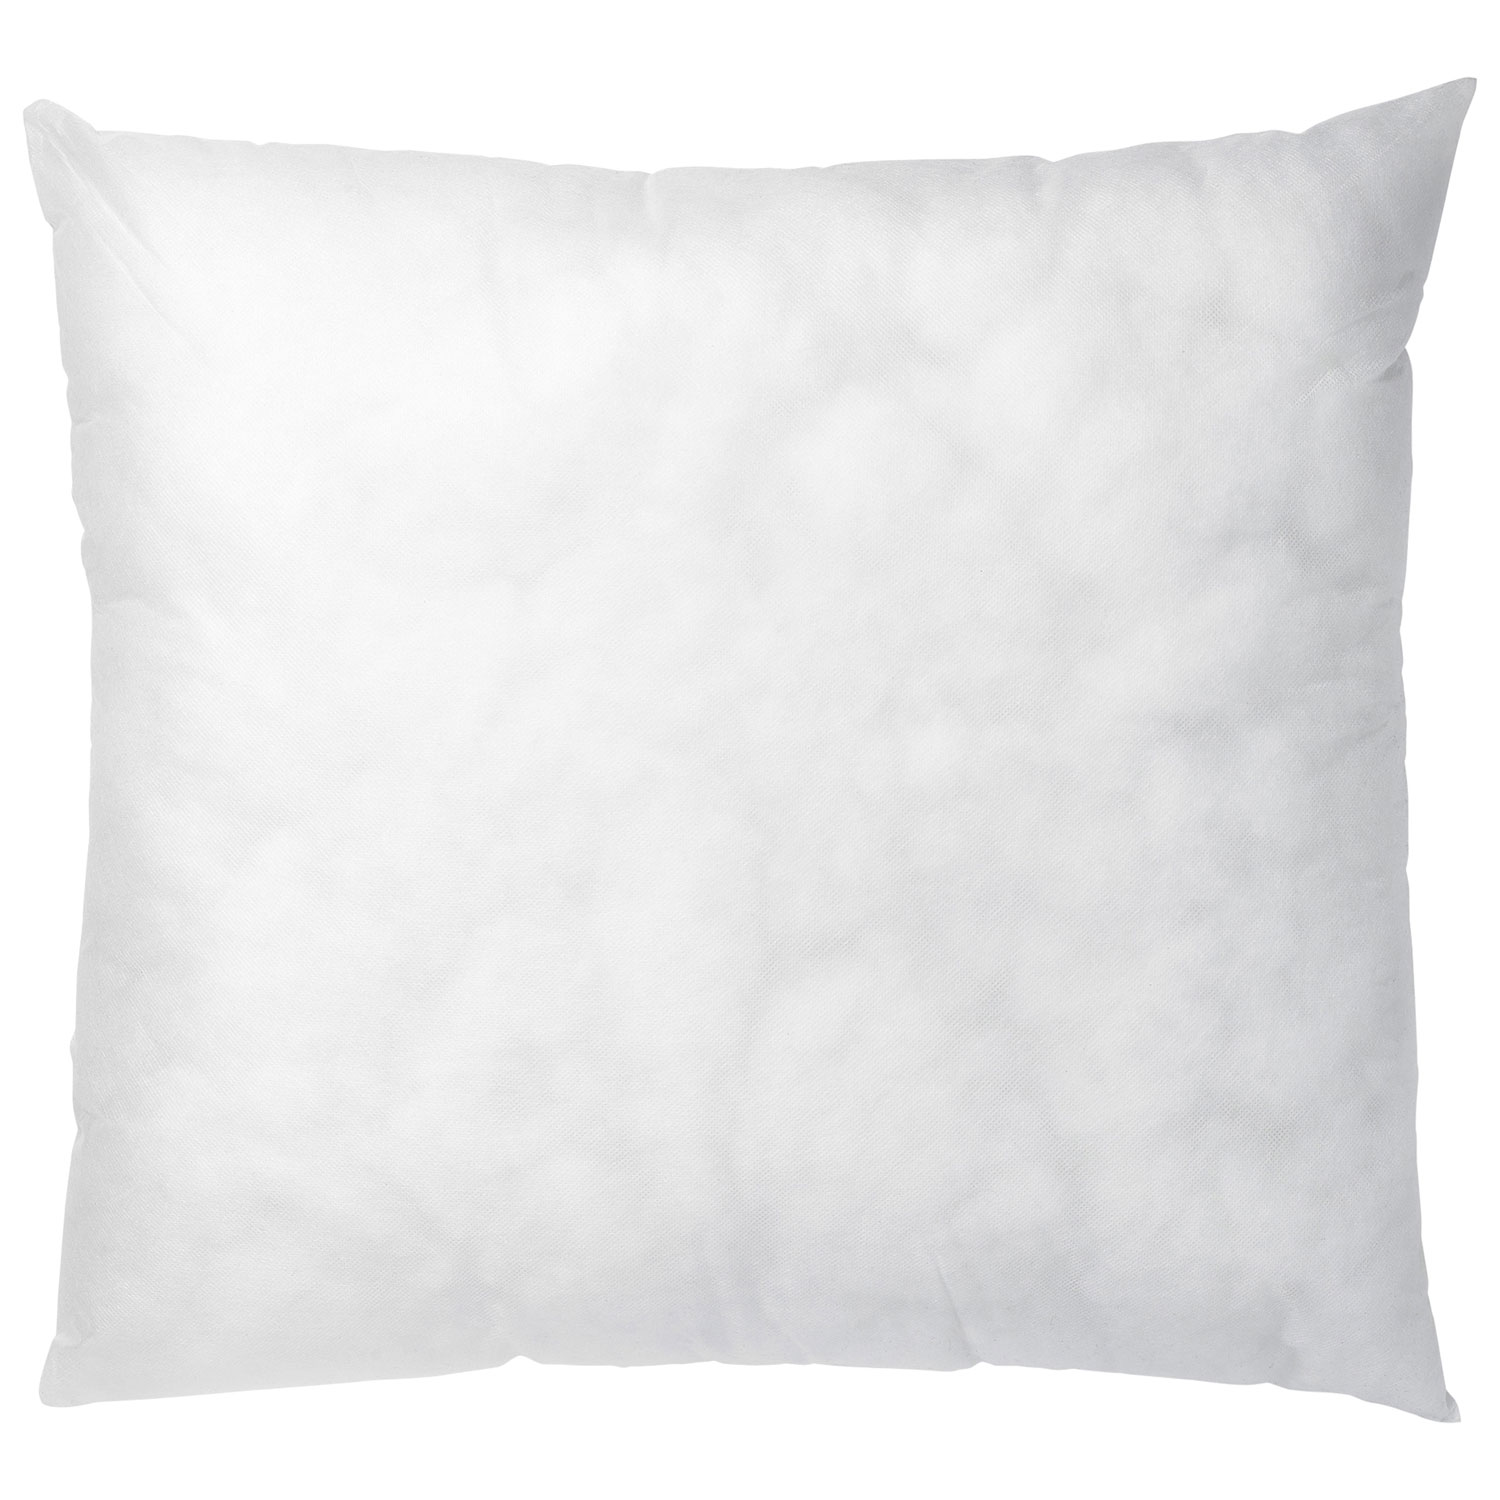 Millano Collection 16" Down Alternative Polyester Pillow Insert - 2 Pack